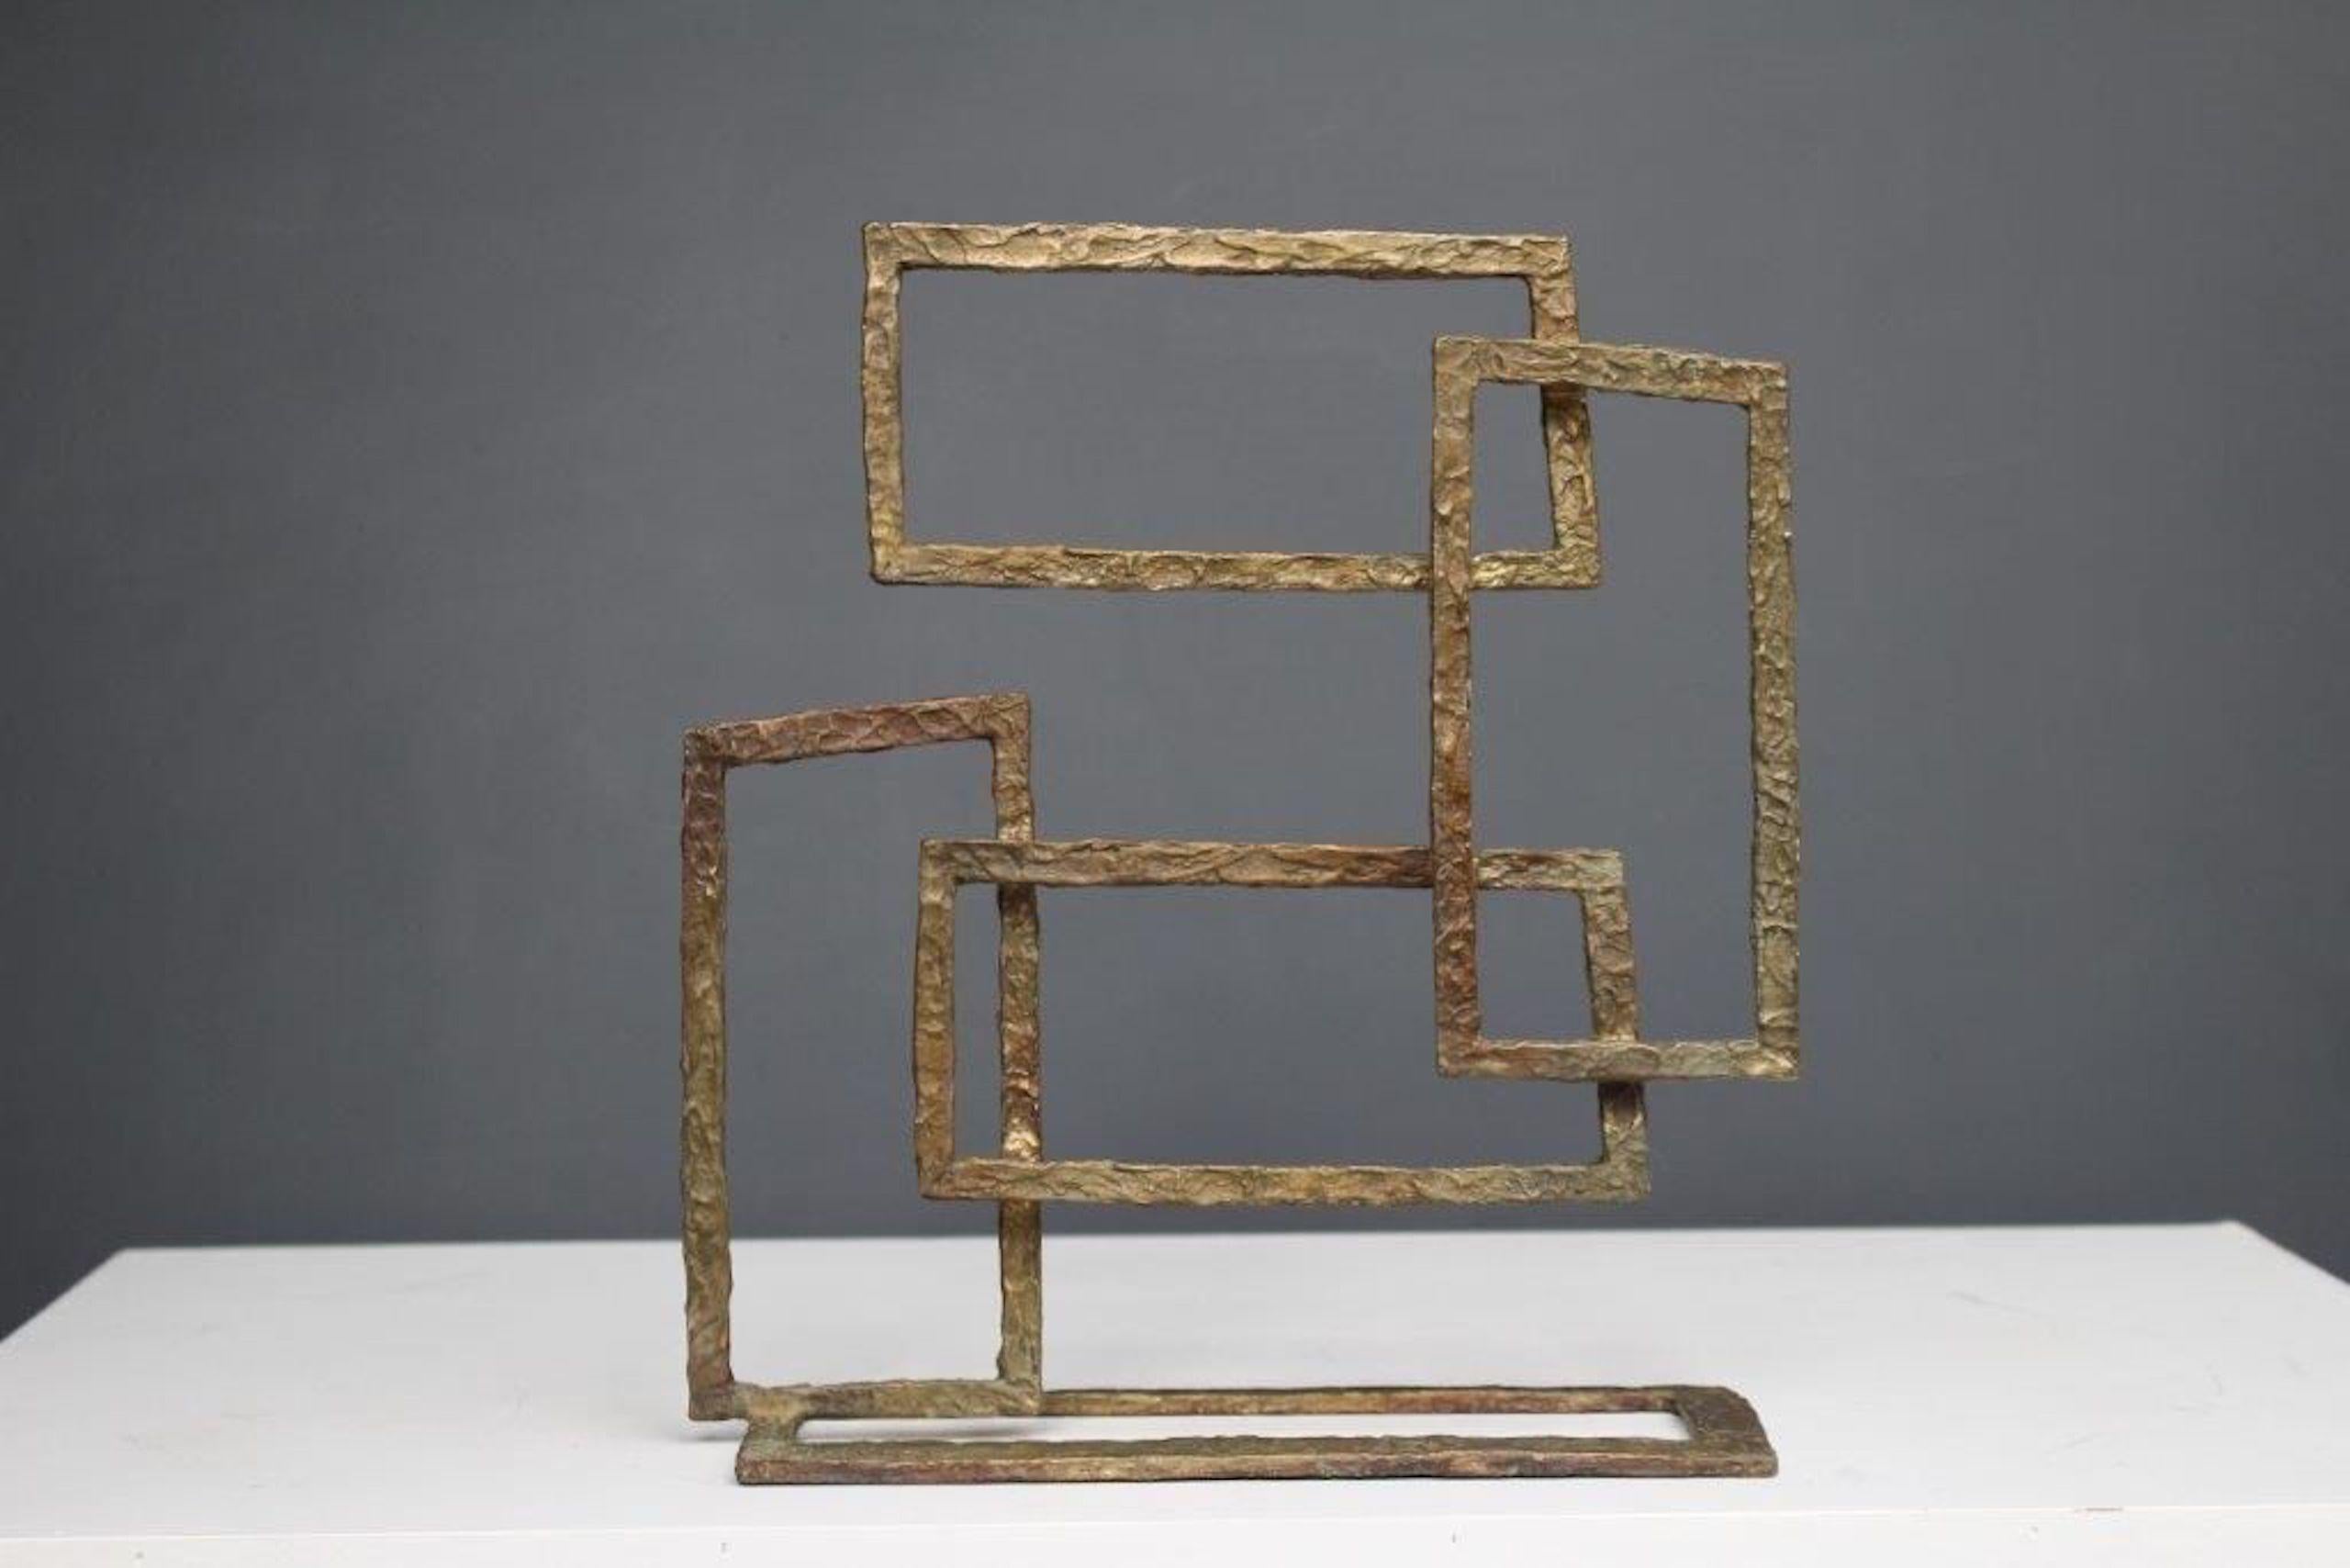 Composition V is a bronze sculpture by contemporary artist Delphine Brabant, dimensions are 33 × 30 × 11 cm (13 × 11.8 × 4.3 in). 
The sculpture is signed and numbered, it is part of a limited edition of 8 editions and comes with a certificate of